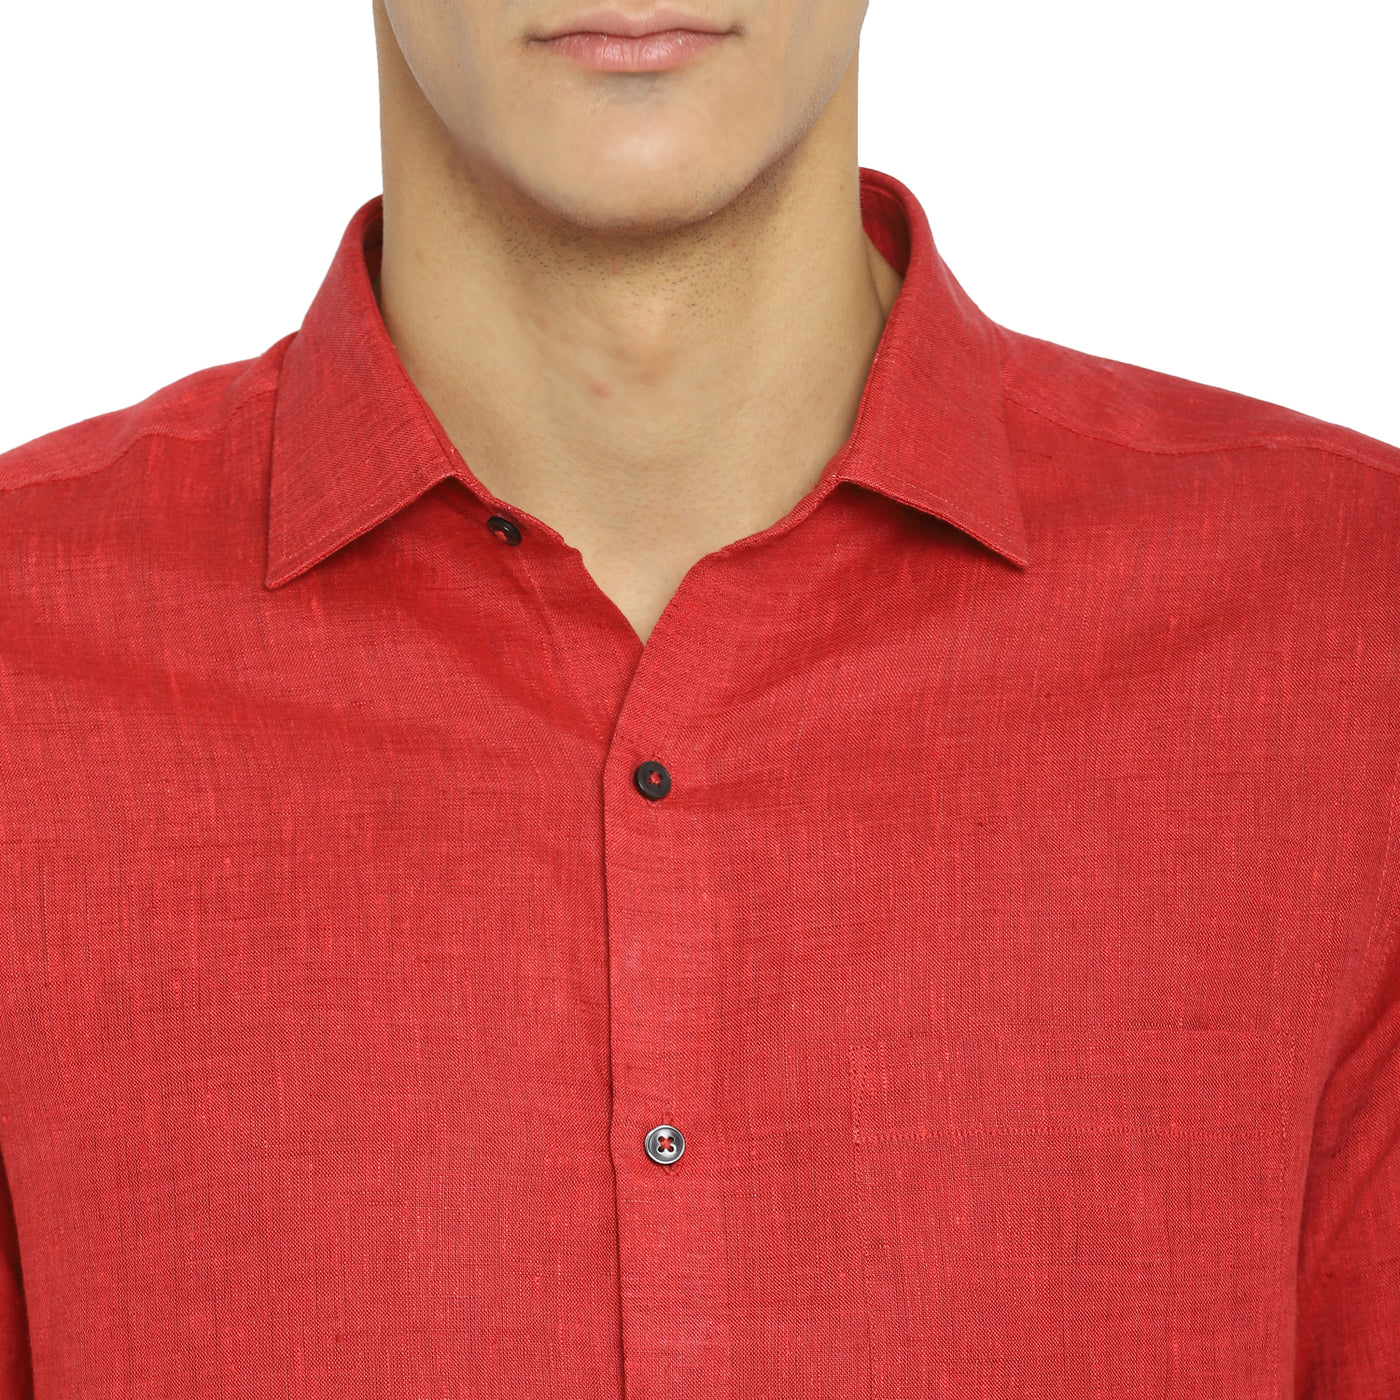 Maroon Linen Solid Slim Fit Shirts